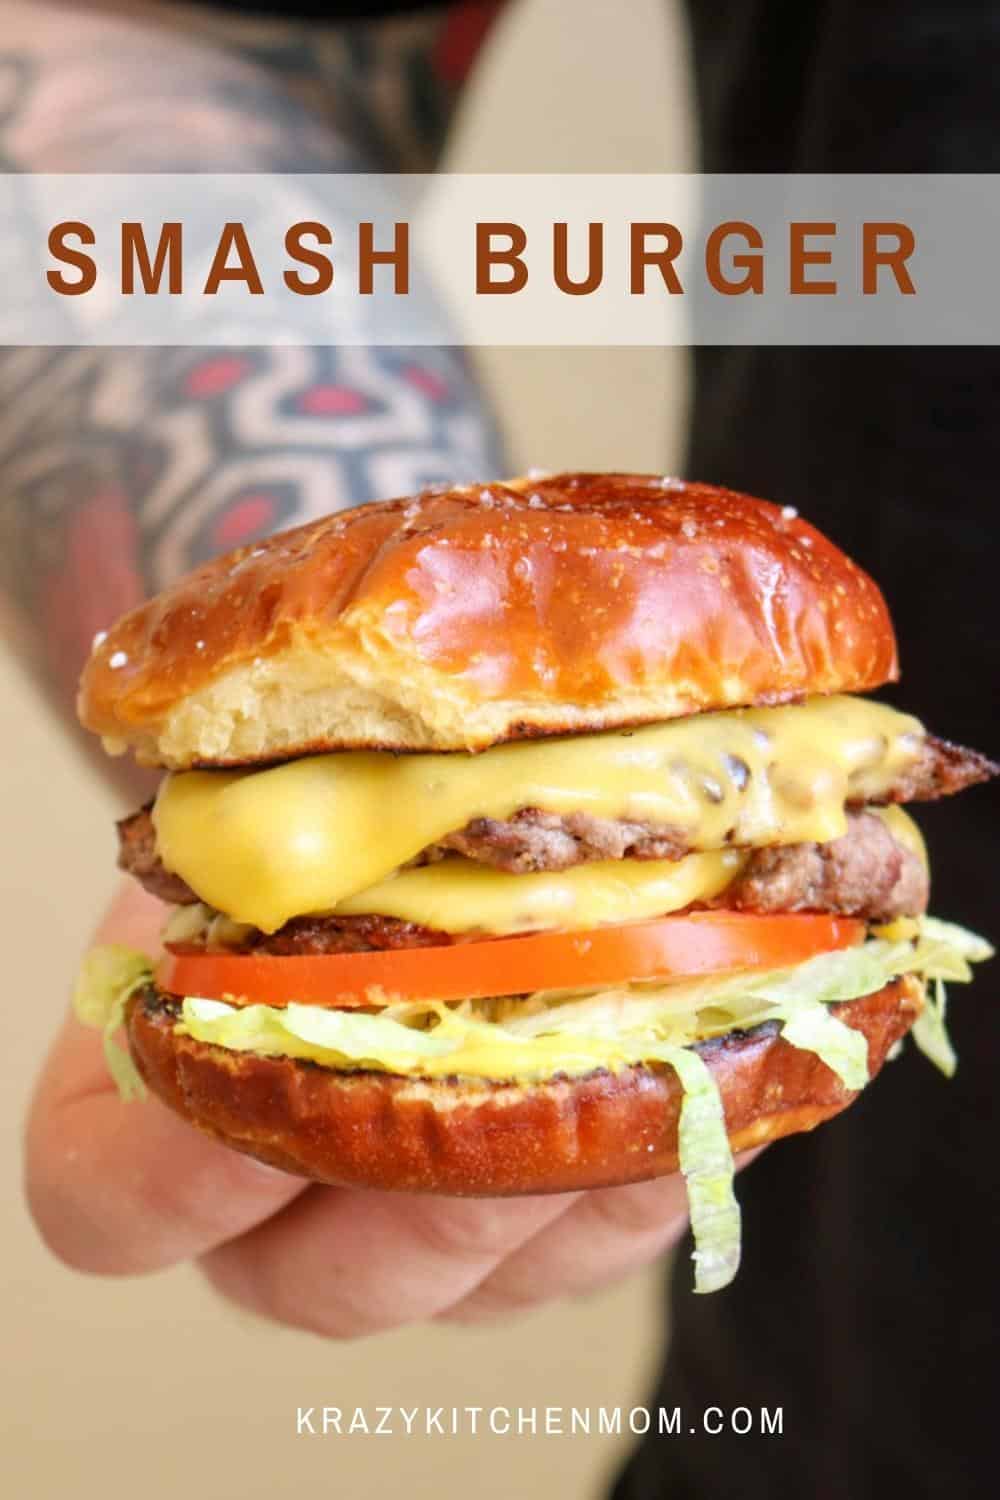 A perfectly caramelized hamburger on the outside but nice and juicy on the inside. The trick is in the smash. via @krazykitchenmom